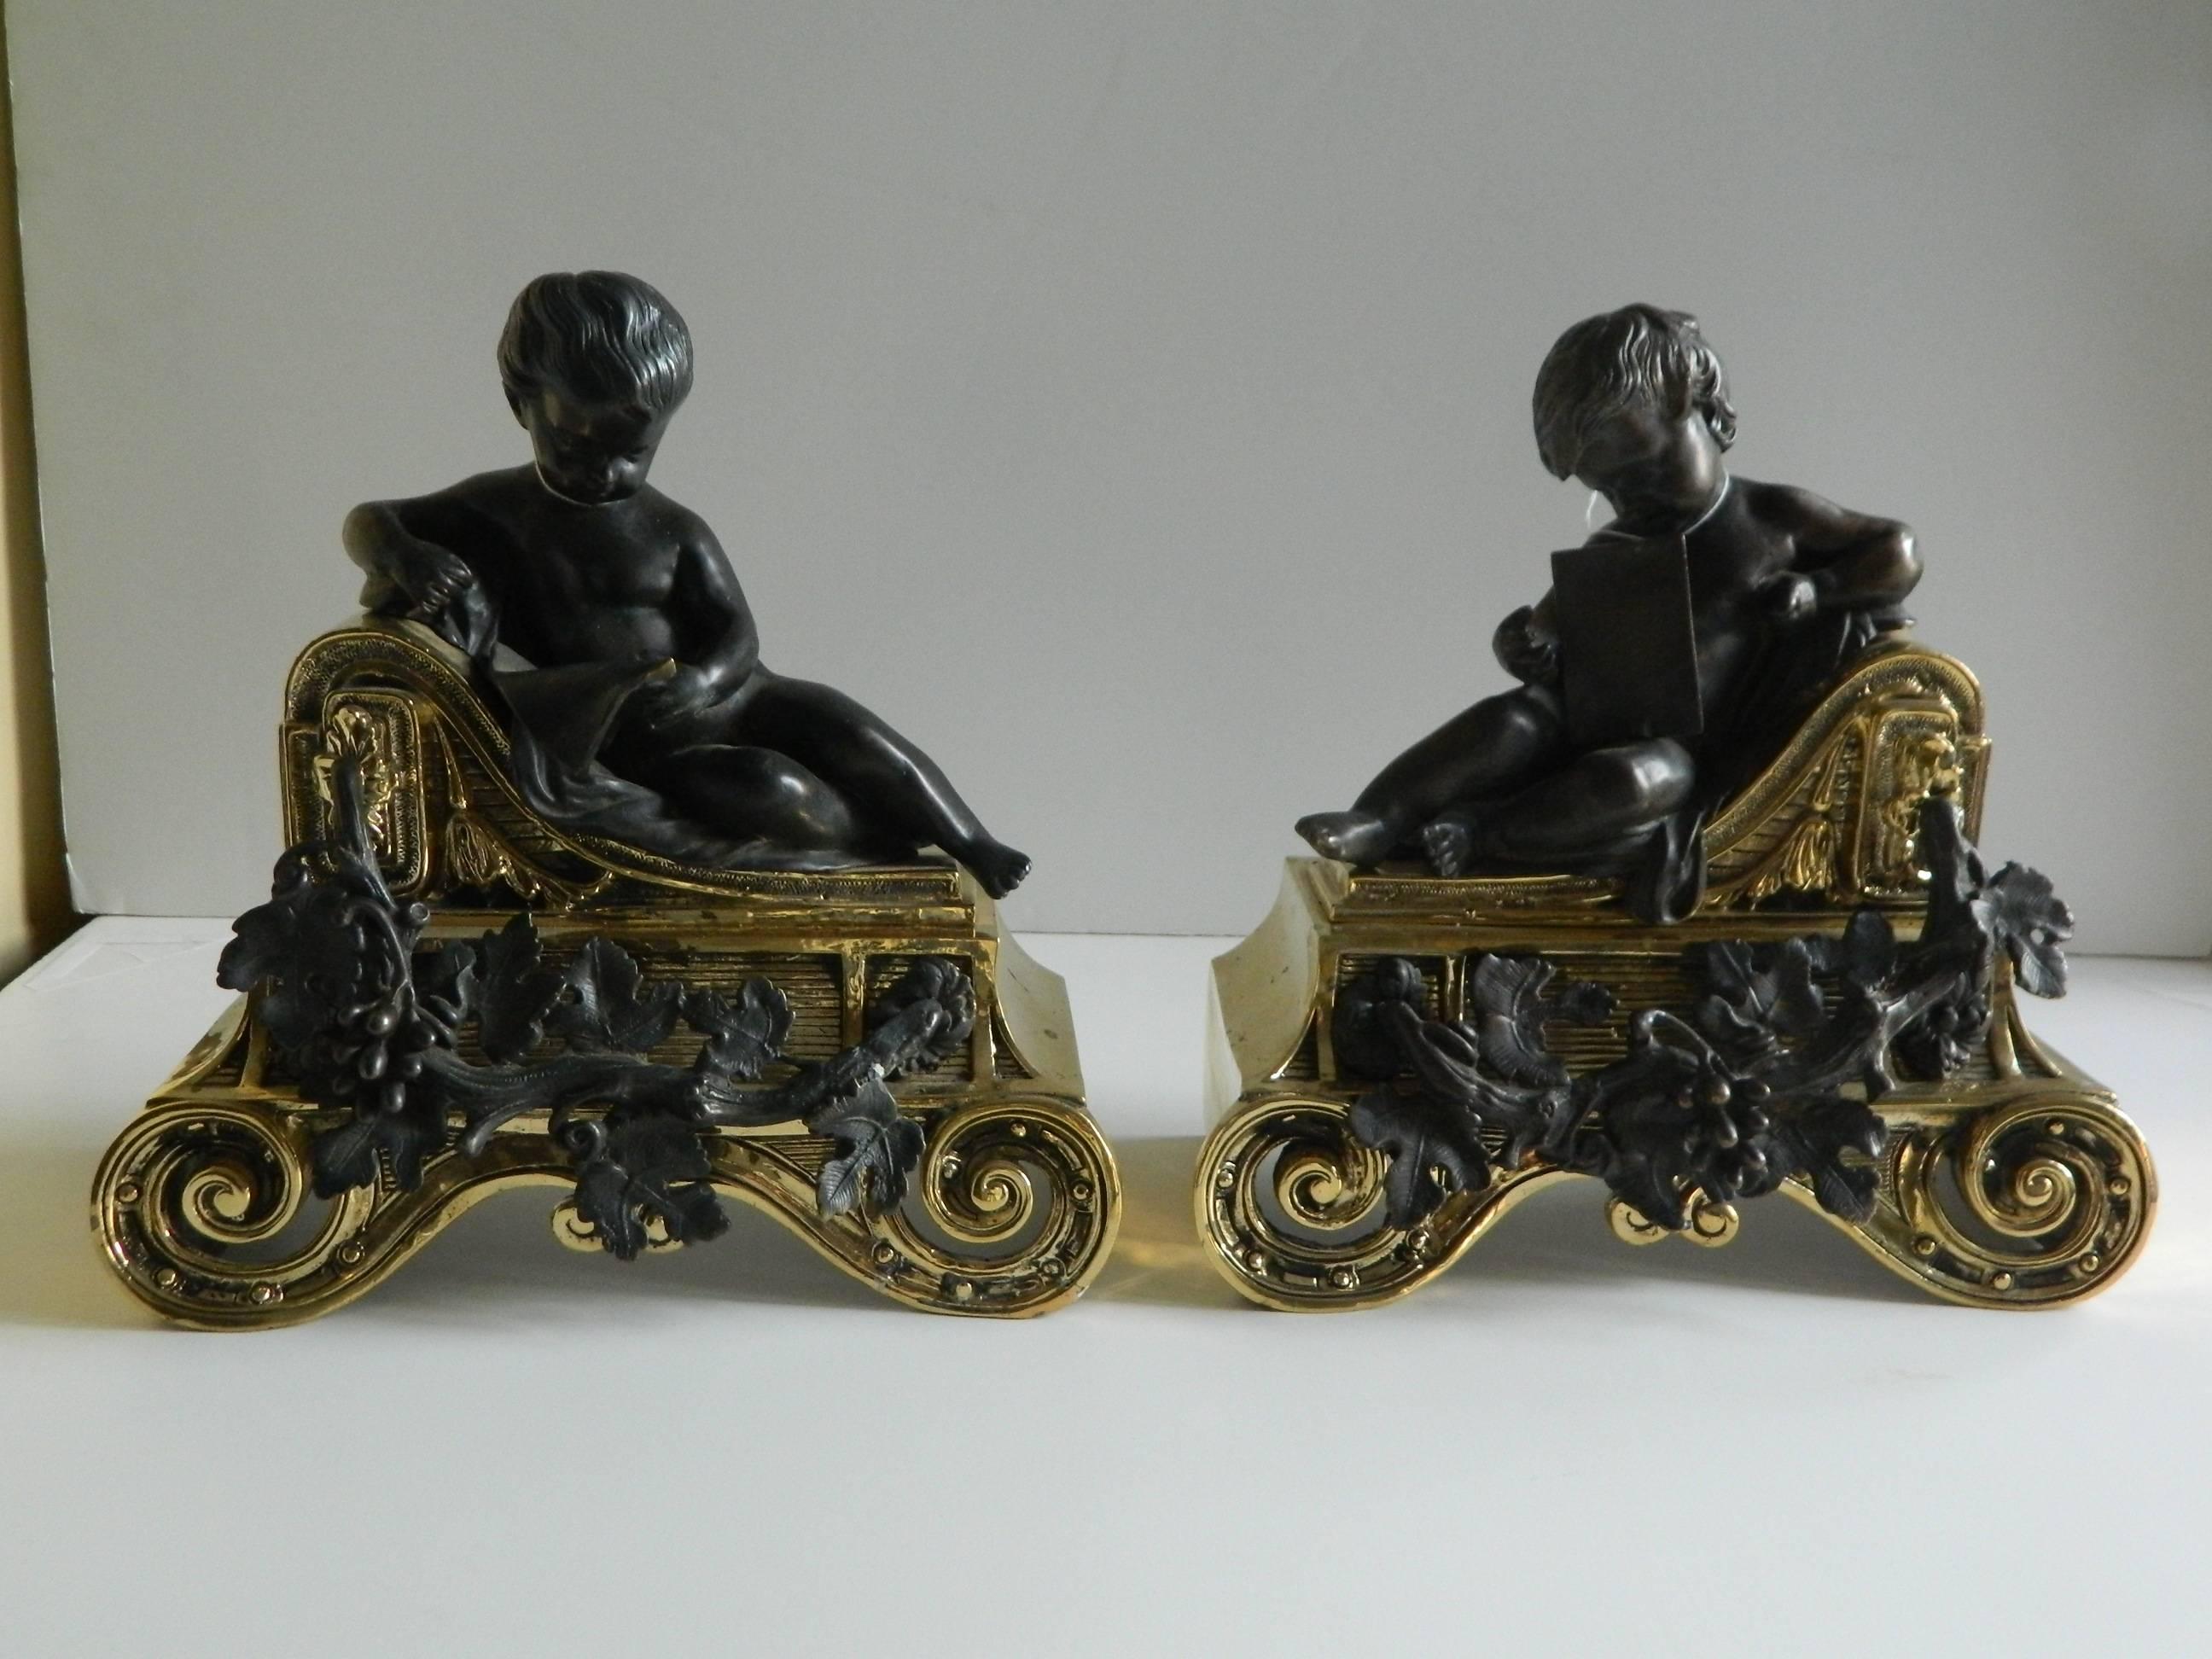 Pair of polished brass chenets or andirons with bronze cherubs, 19th century.
 